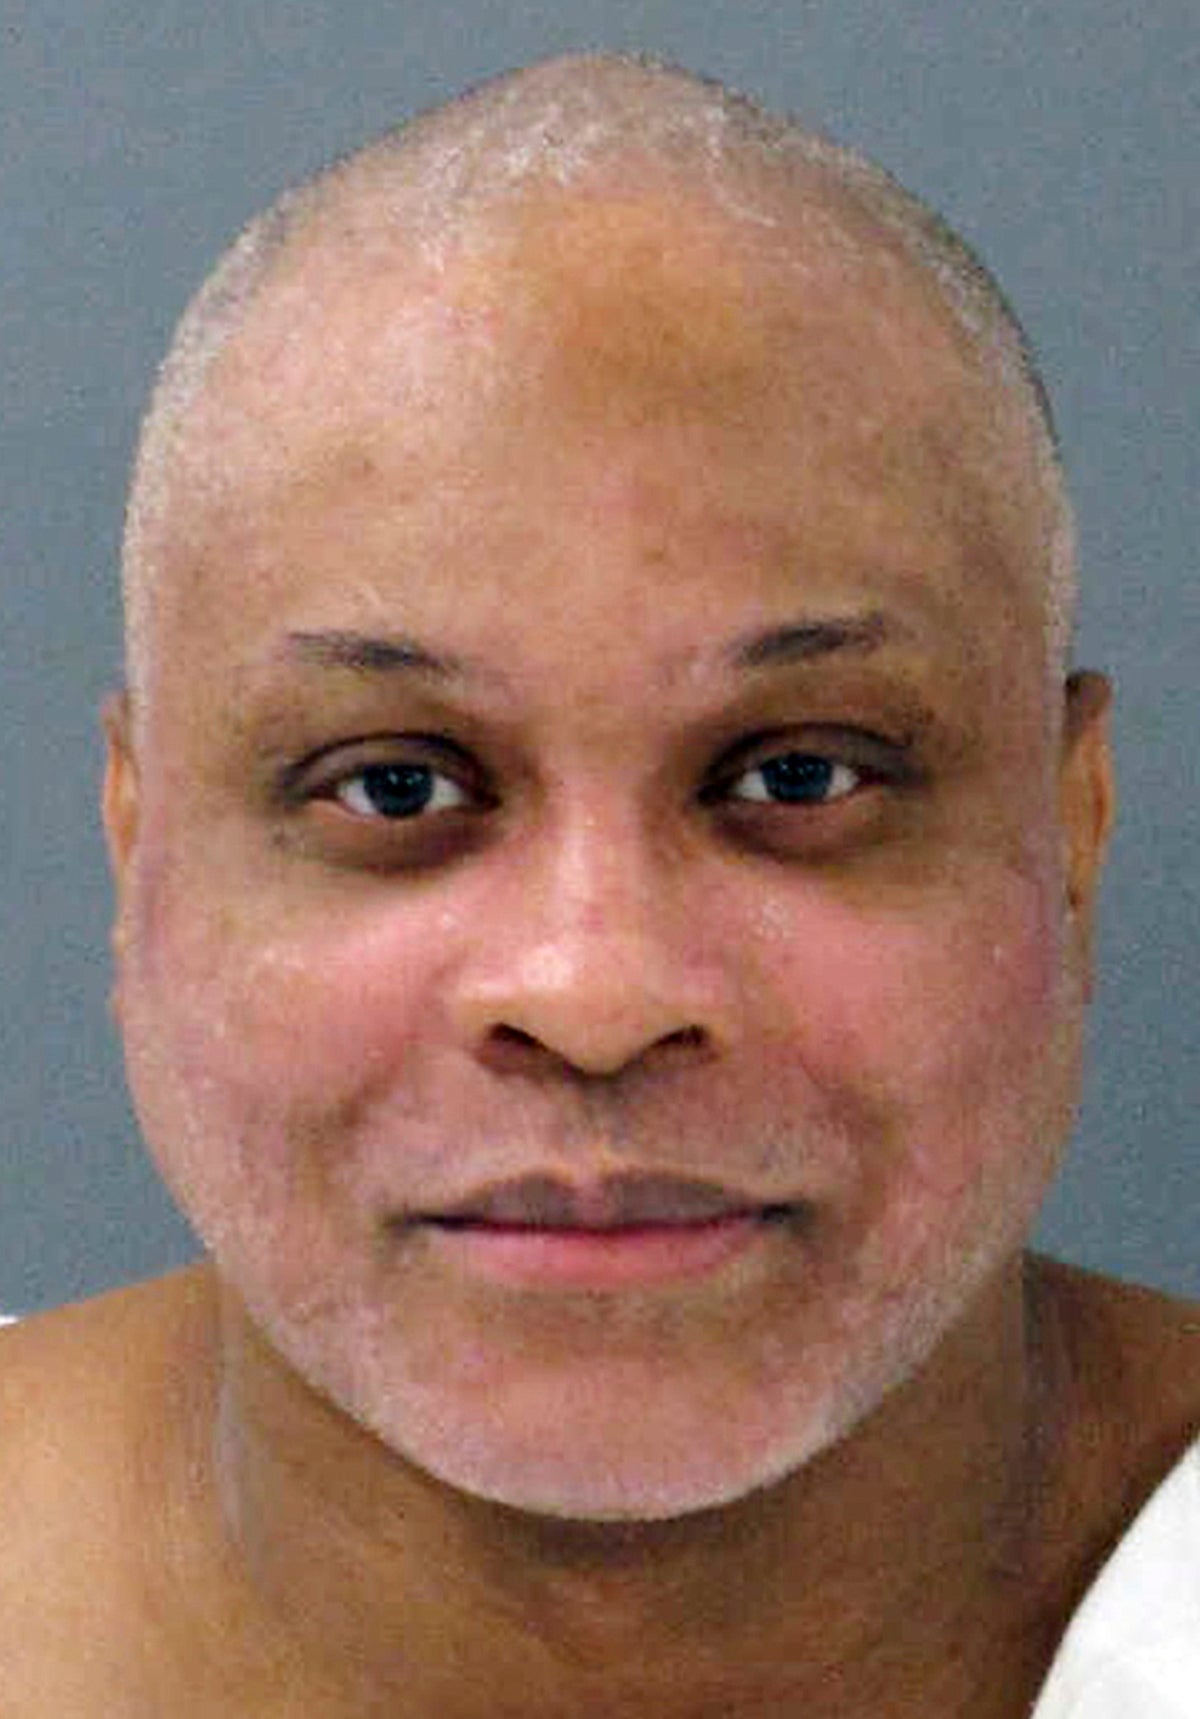 Execution of man convicted in killing of 3 in Texas delayed